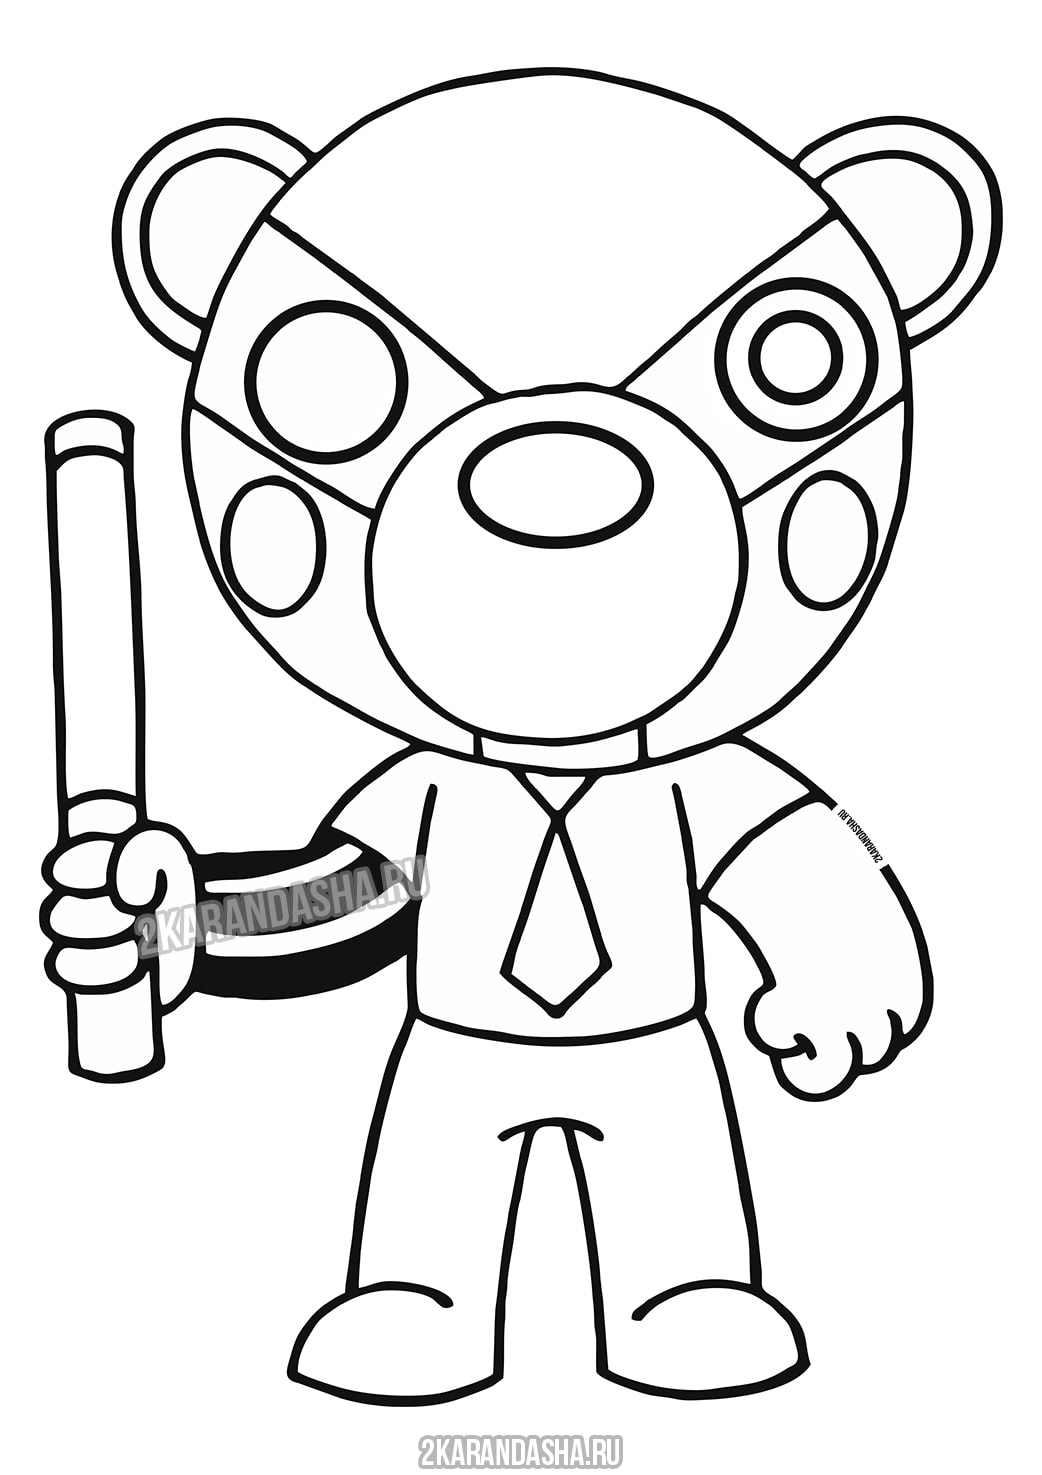 Coloring Page Roblox Piggy Badgy Print Roblox - corloring pages of roblox to print